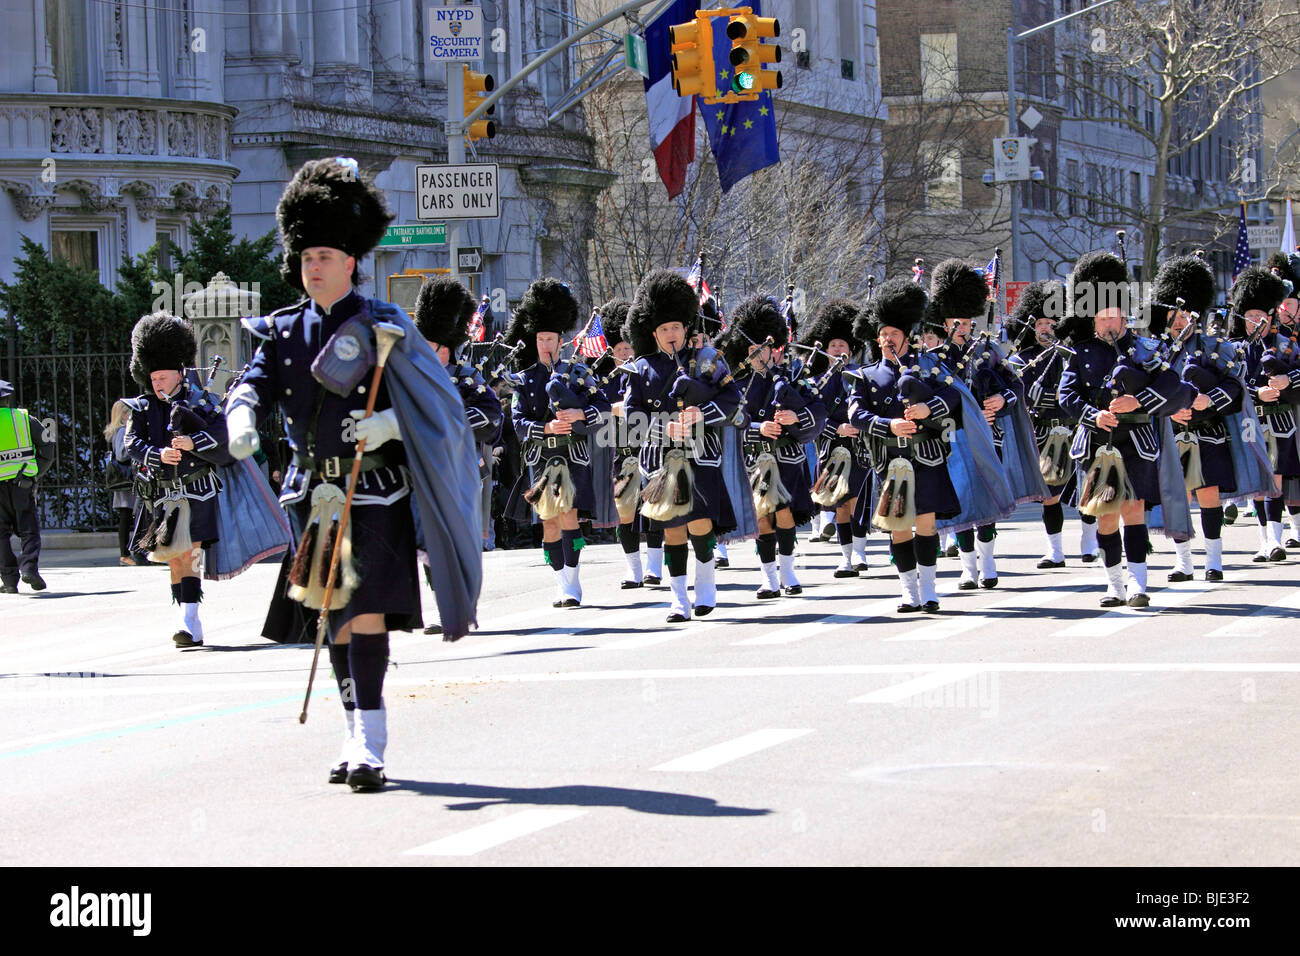 Paramus, NJ Police Department Pipes and Drum Band marches in New York City's St. Patrick's Day parade. Stock Photo